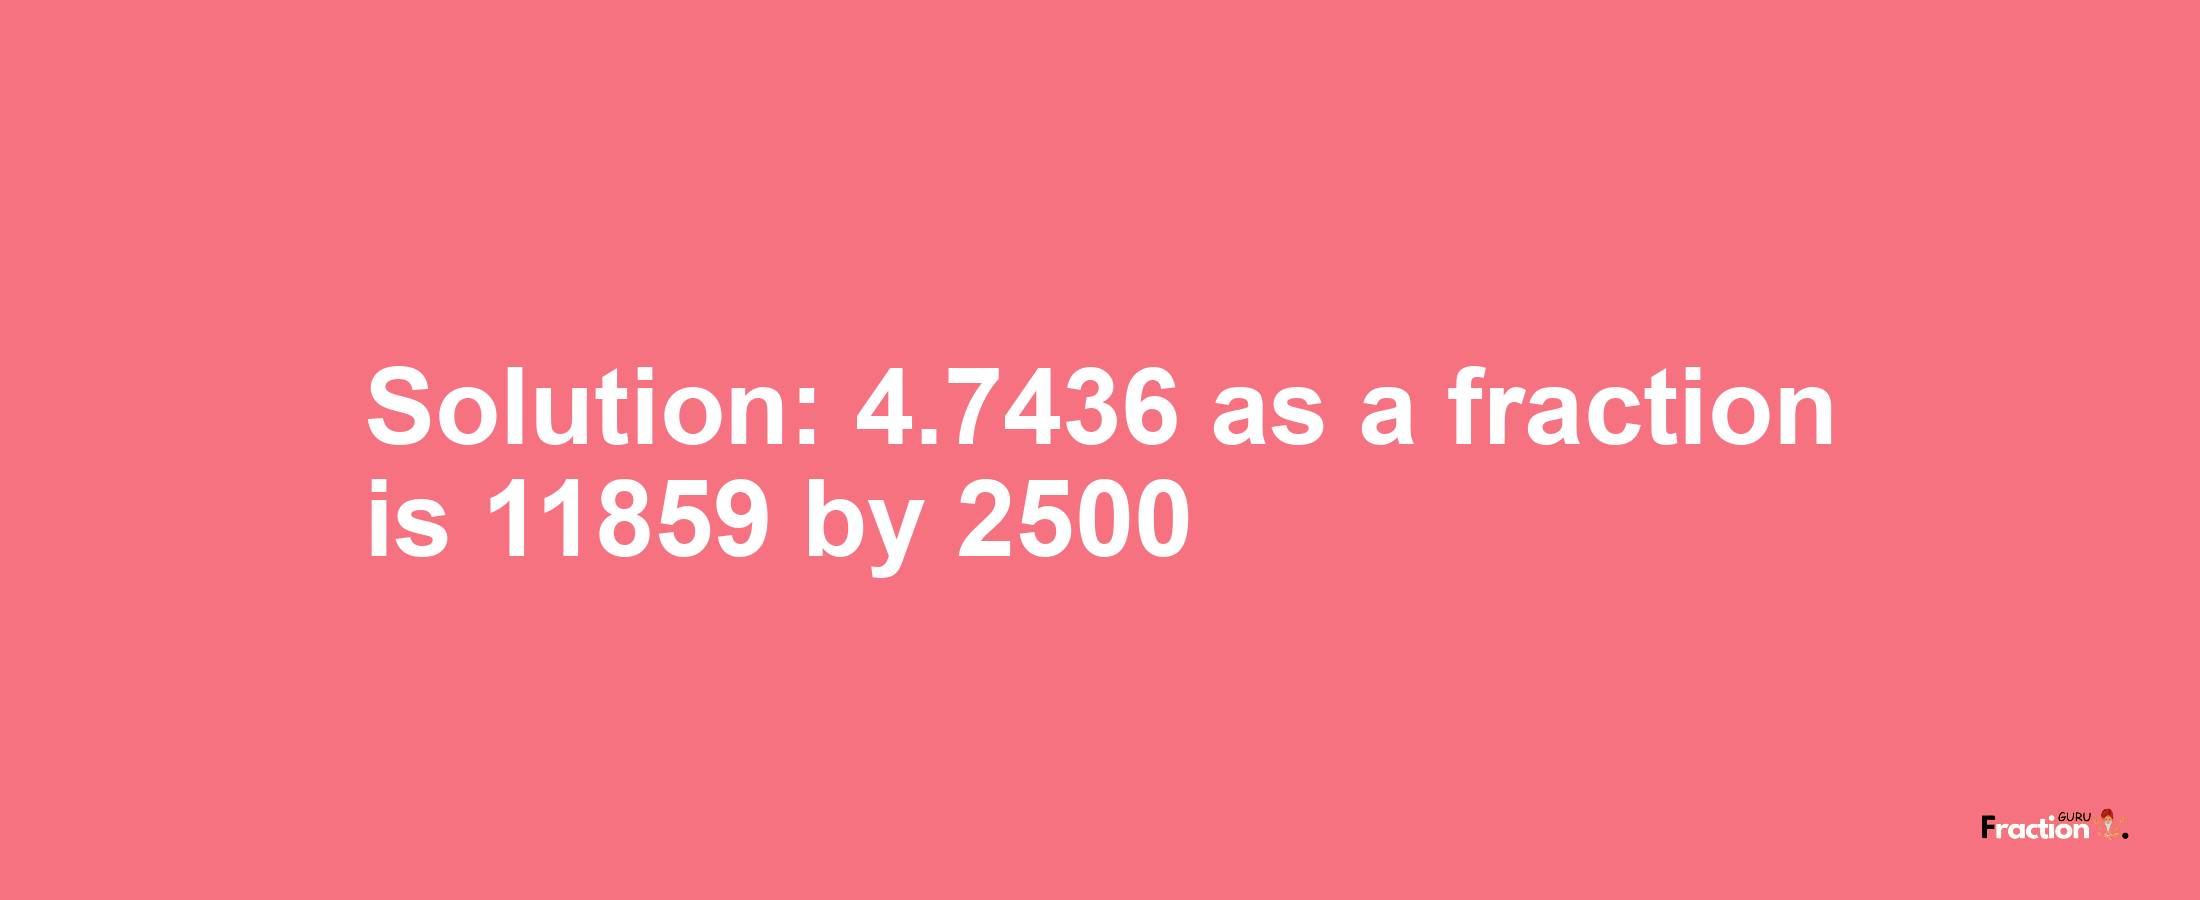 Solution:4.7436 as a fraction is 11859/2500